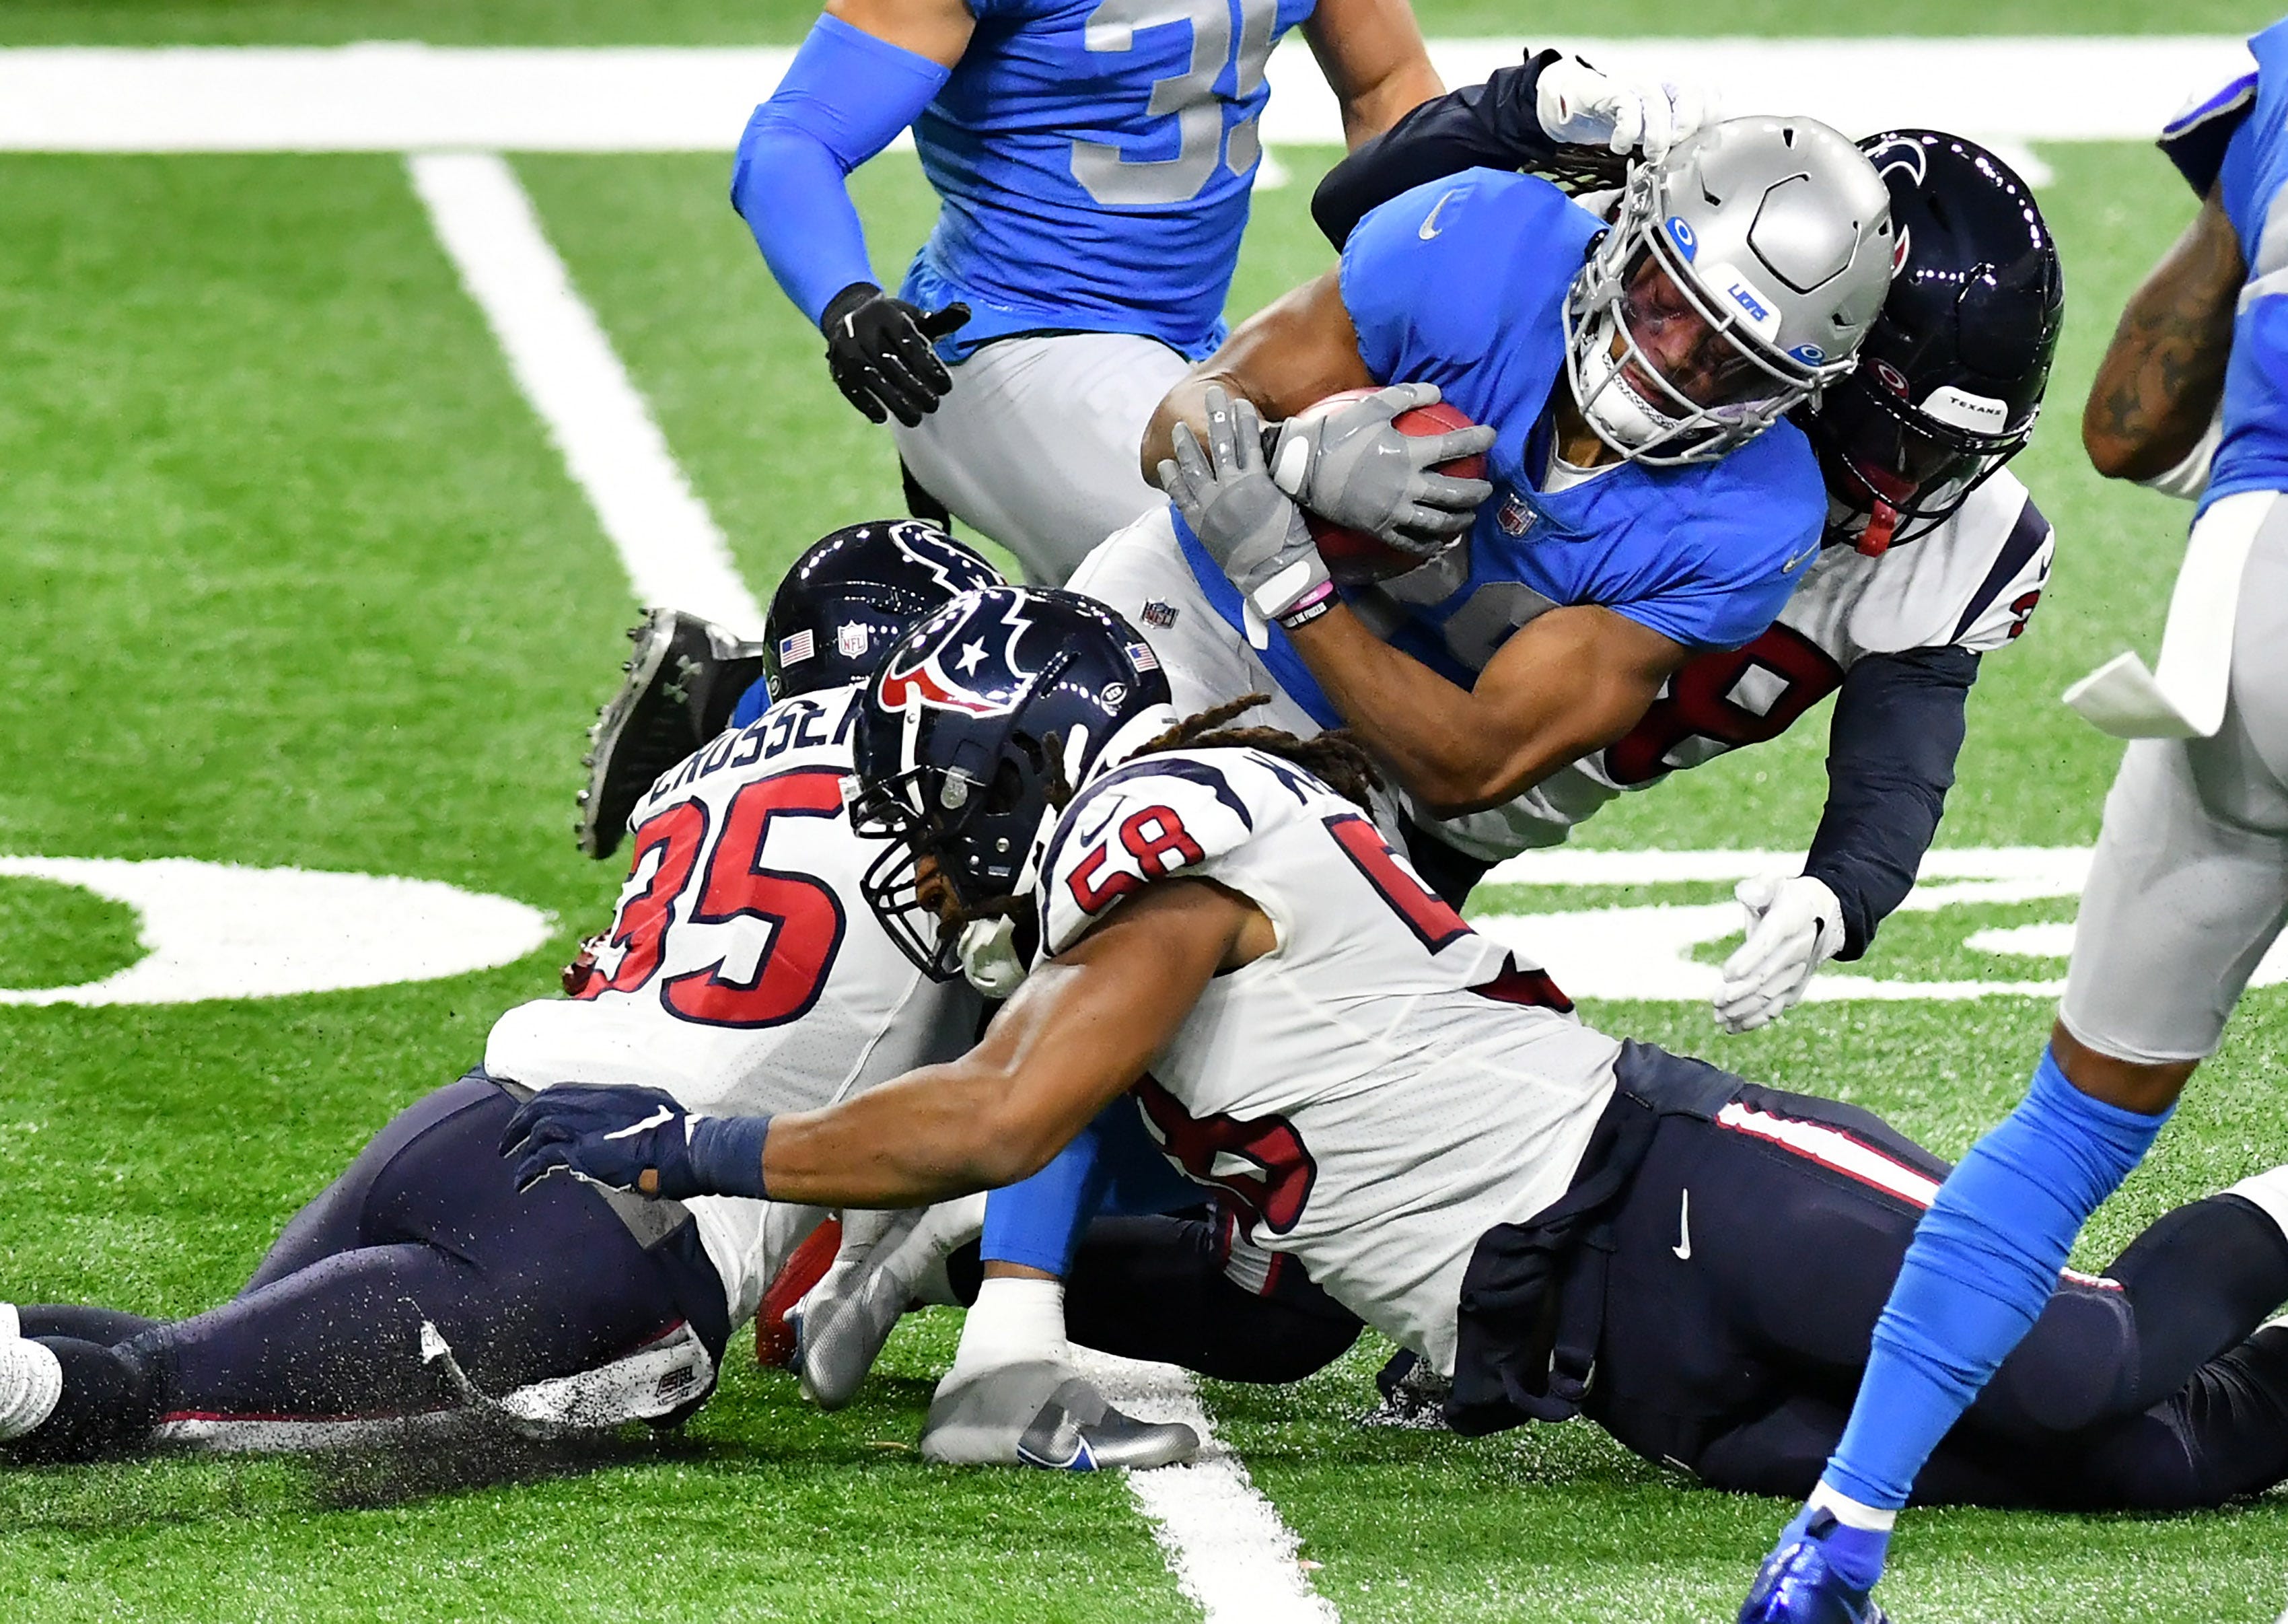 Texans cornerback Keion Crossen (35), linebacker Peter Kalambayi (58) and running back Buddy Howell (38) tackle Lions wide receiver Jamal Agnew (39)  in the first half.  Detroit Lions vs Houston Texans on Thanksgiving Day at Ford Field in Detroit on Nov. 26, 2020.